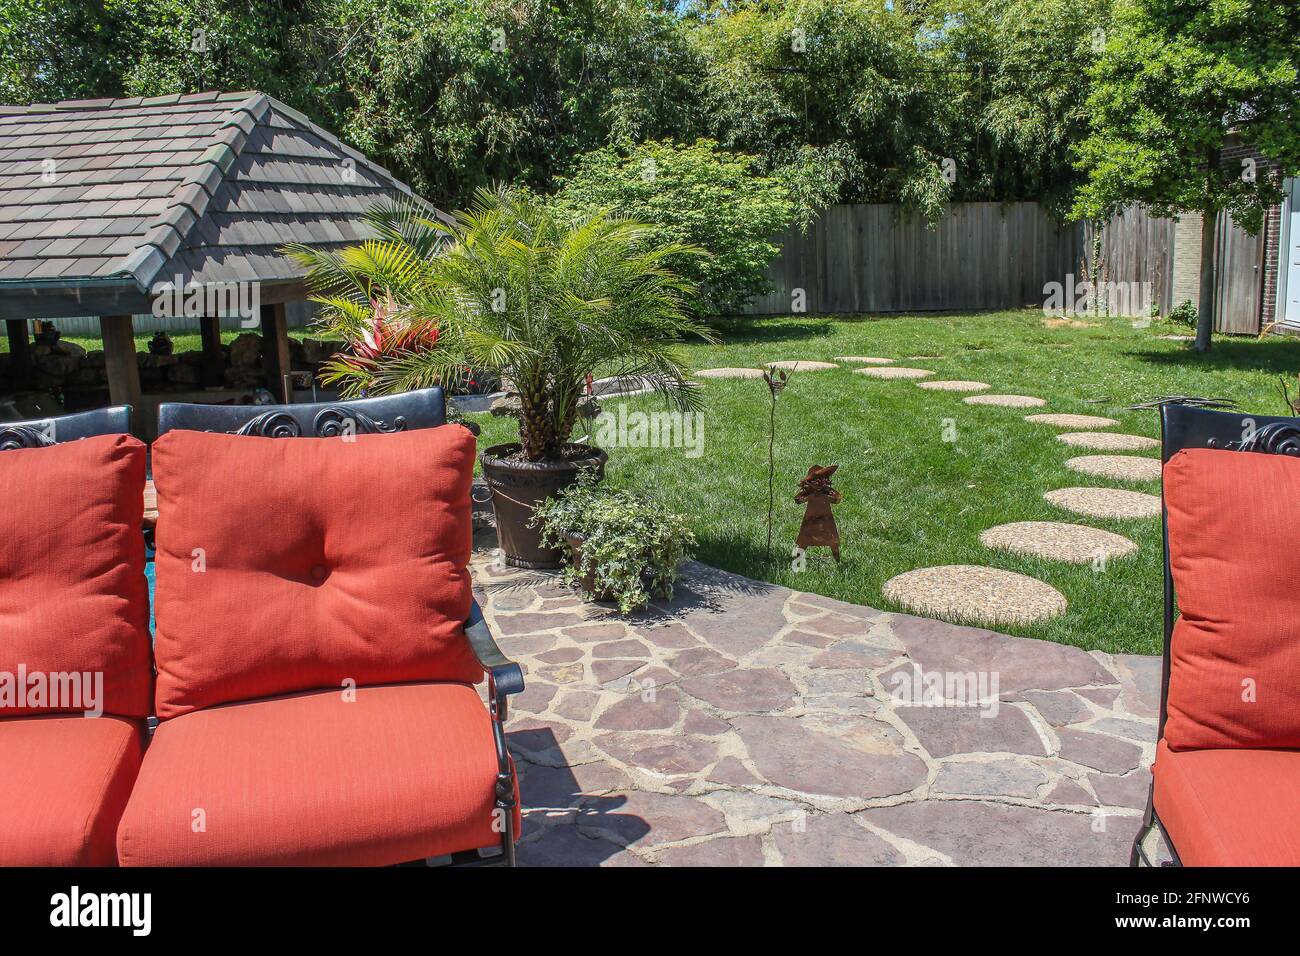 Backyard garden with patio and stepping stones to covered outdoor living area - orange cushioned lawn furniture in foreground with wooden privacy fenc Stock Photo